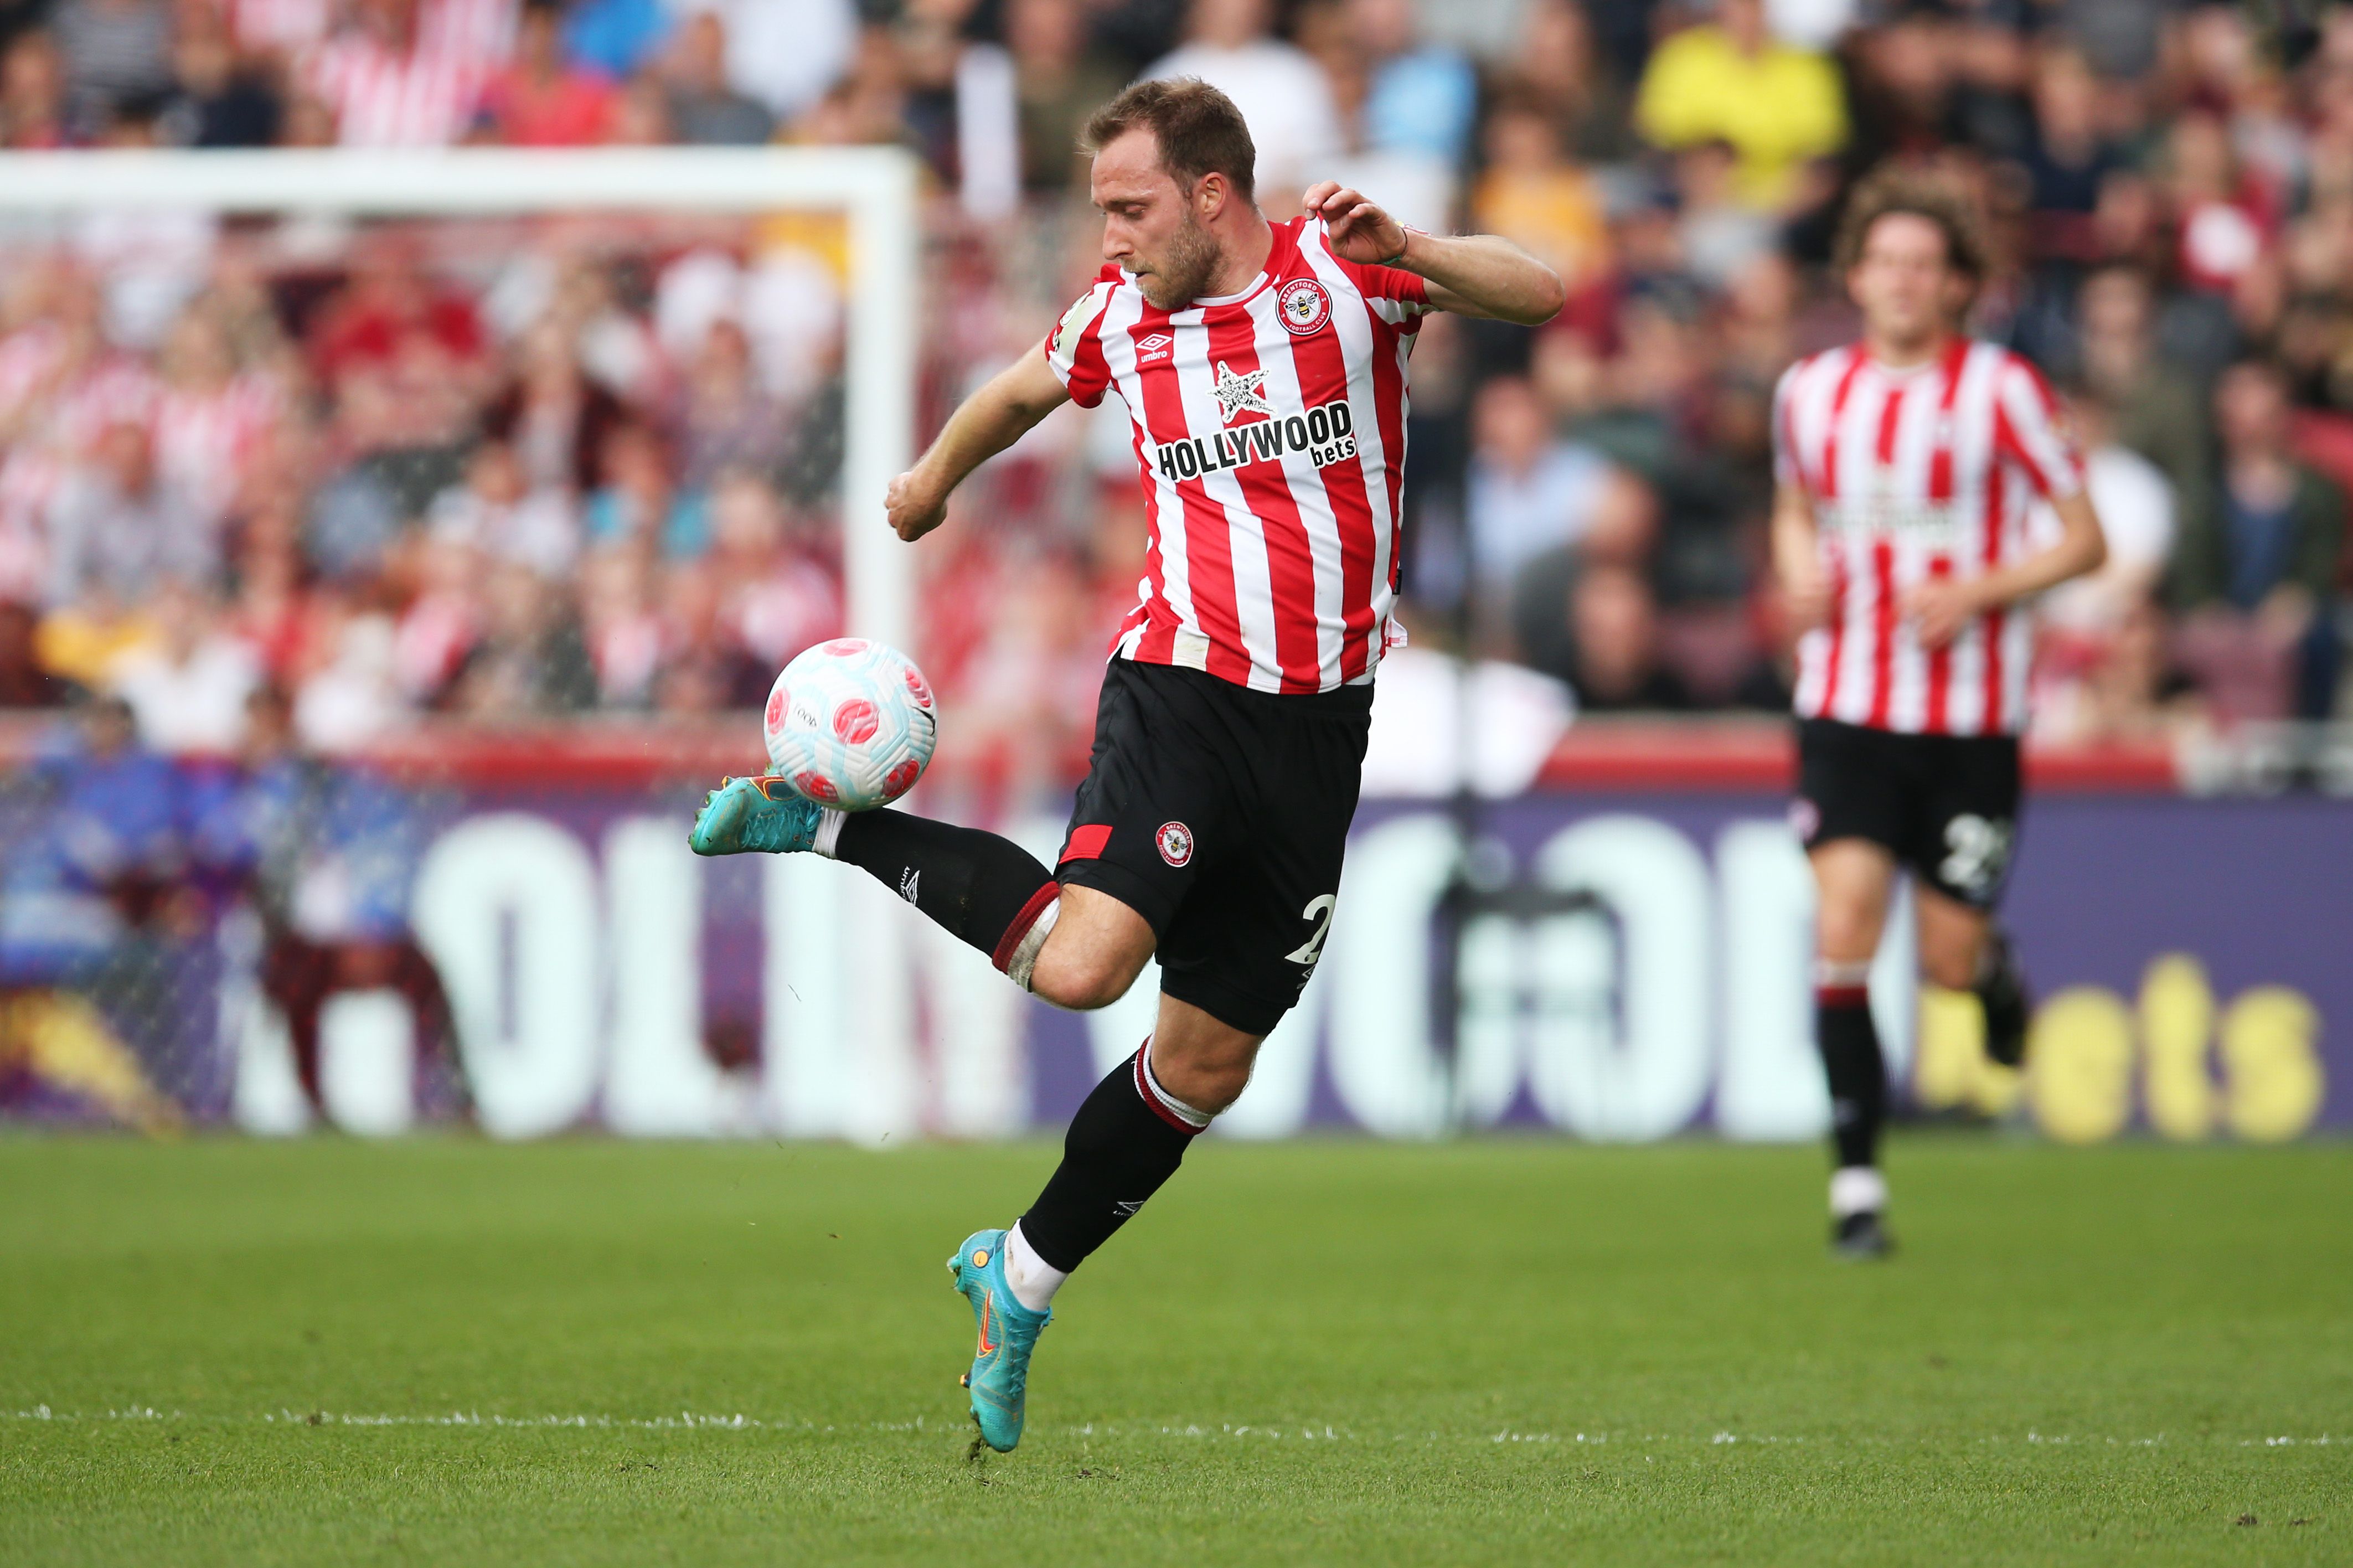 BRENTFORD, ENGLAND - MAY 07: Christian Eriksen of Brentford controls the ball during the Premier League match between Brentford and Southampton at Brentford Community Stadium on May 07, 2022 in Brentford, England. (Photo by Steve Bardens/Getty Images)